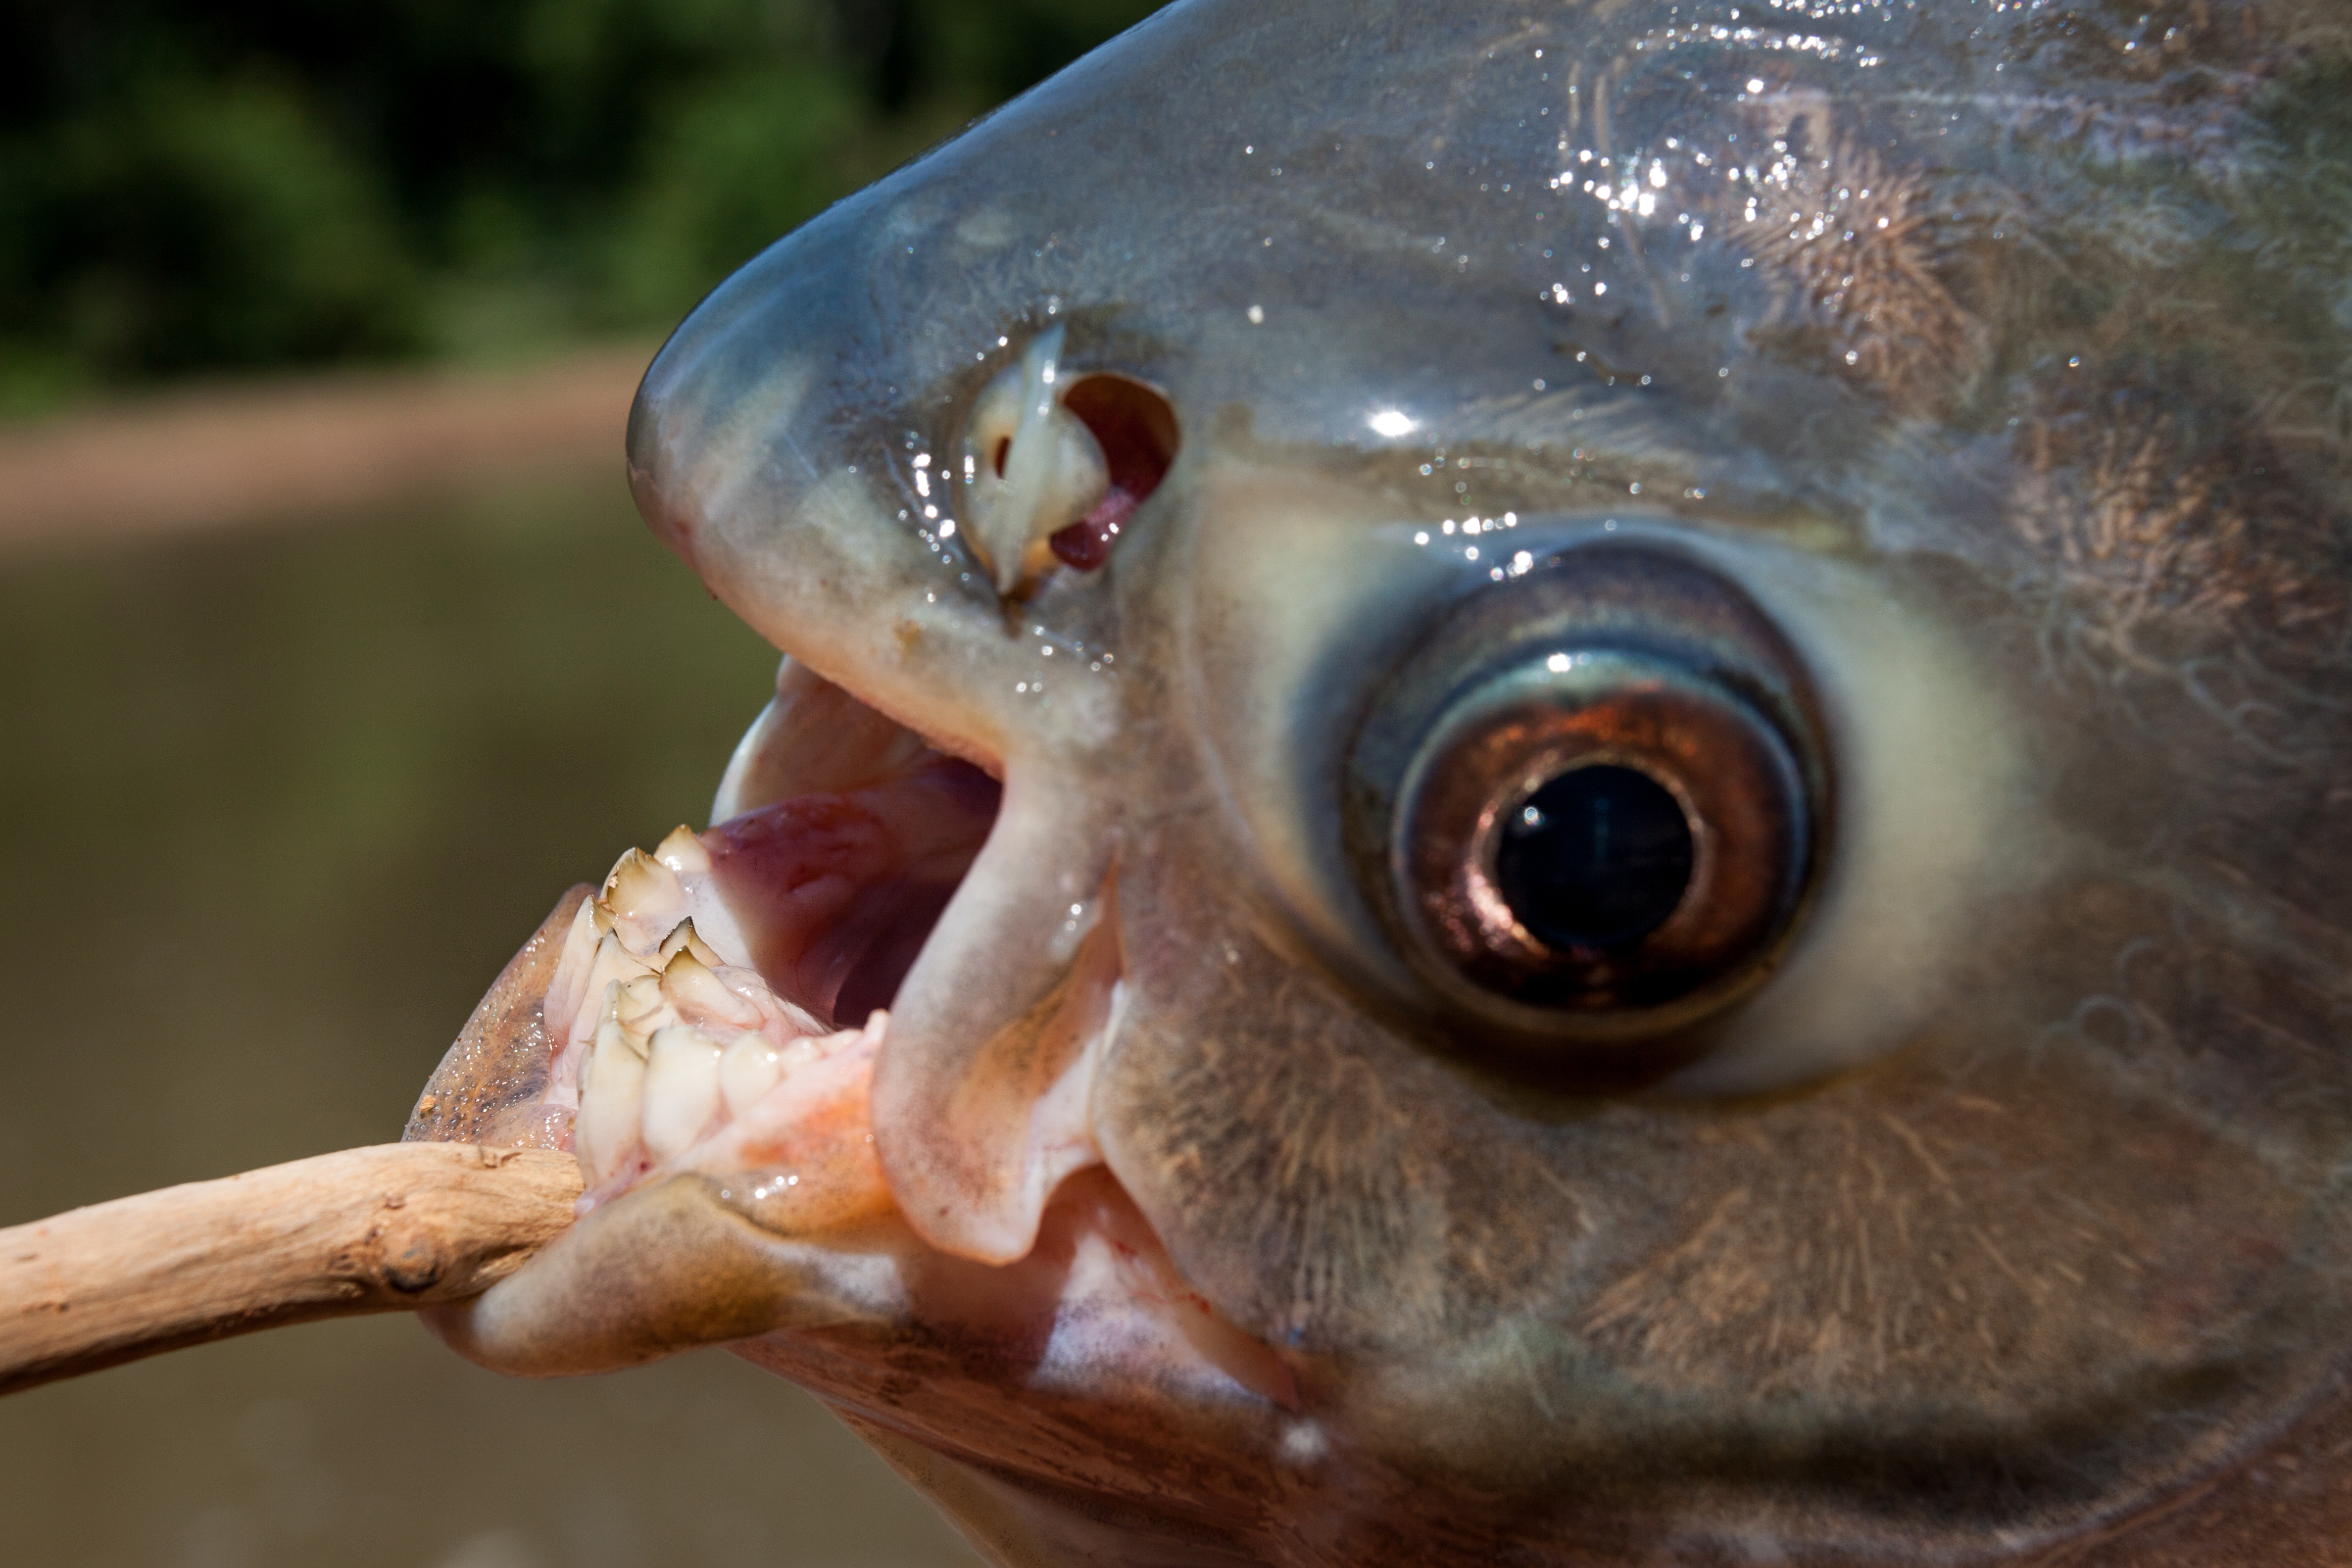 Up close image of the teeth of a pacu fish. The lower lip is held down by a stick giving a side on view. 